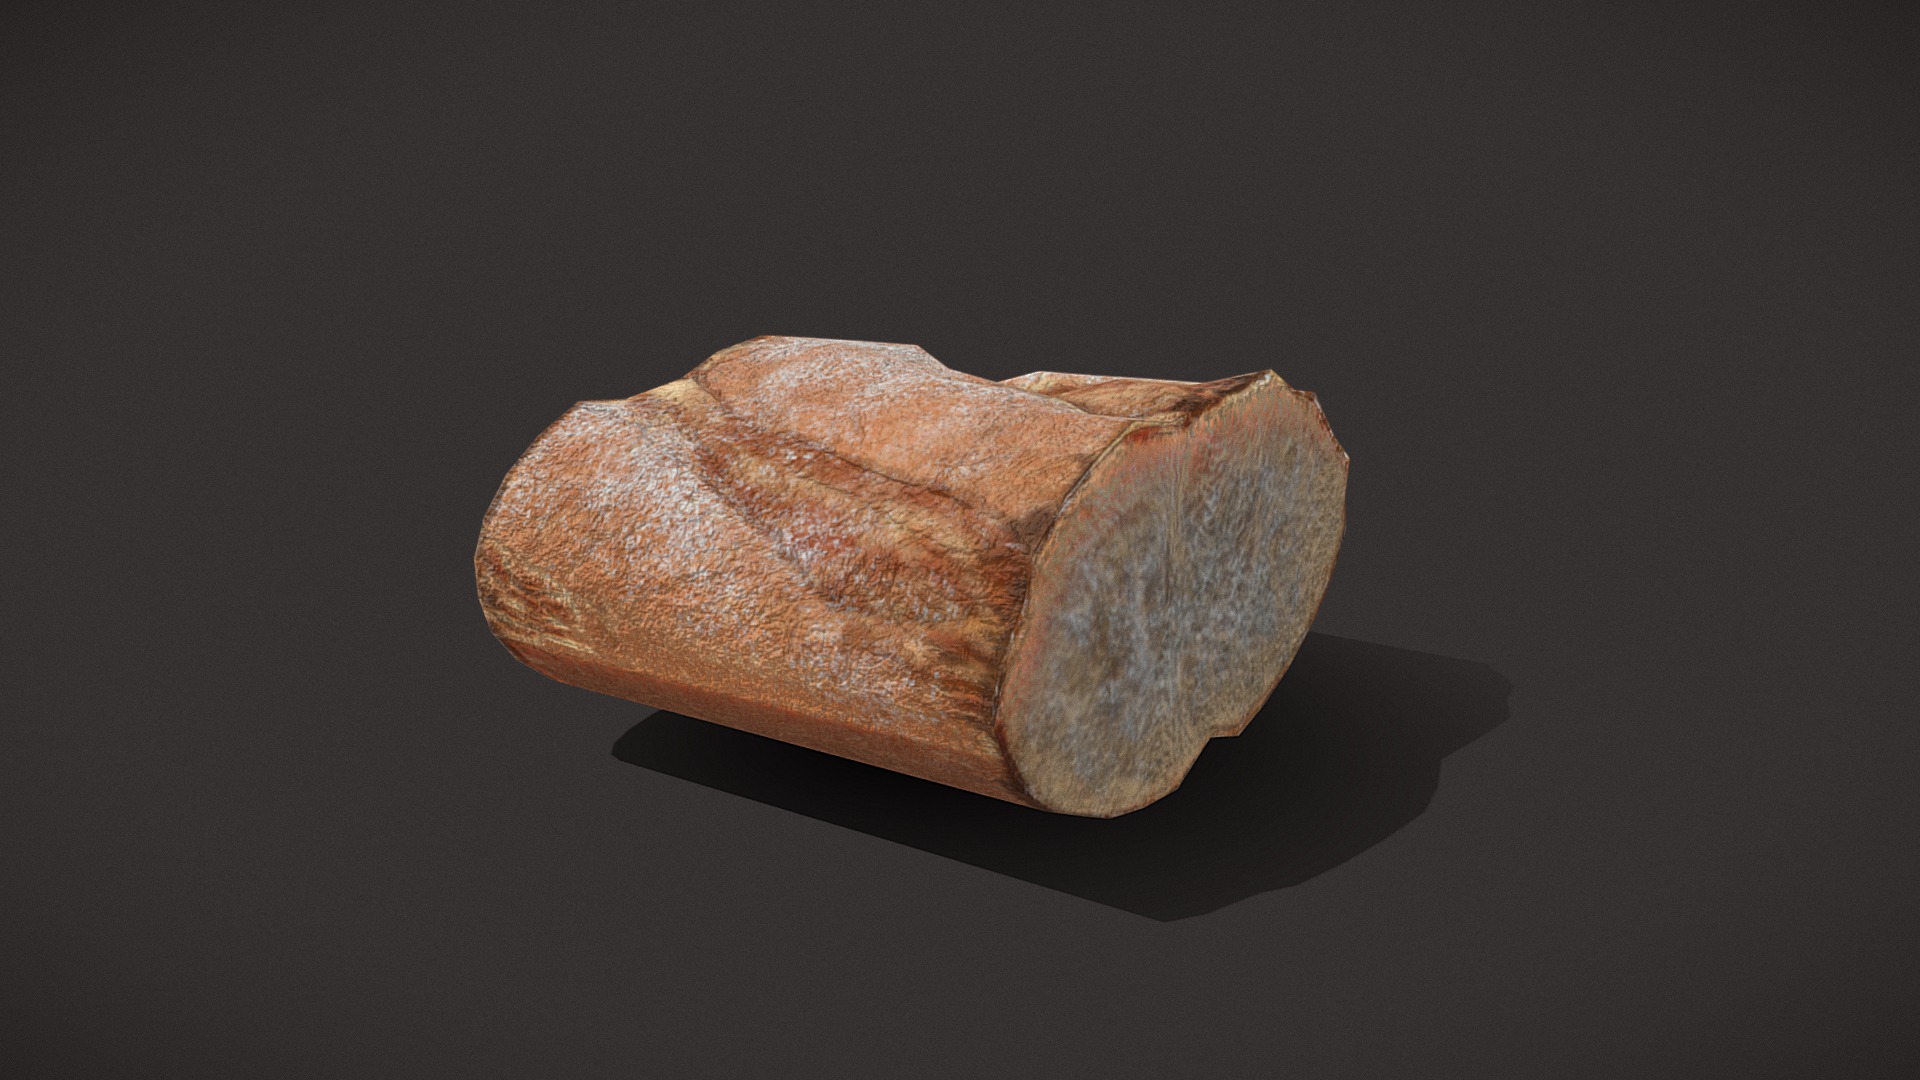 3D model Bread Piece - This is a 3D model of the Bread Piece. The 3D model is about a stone with a dark background.